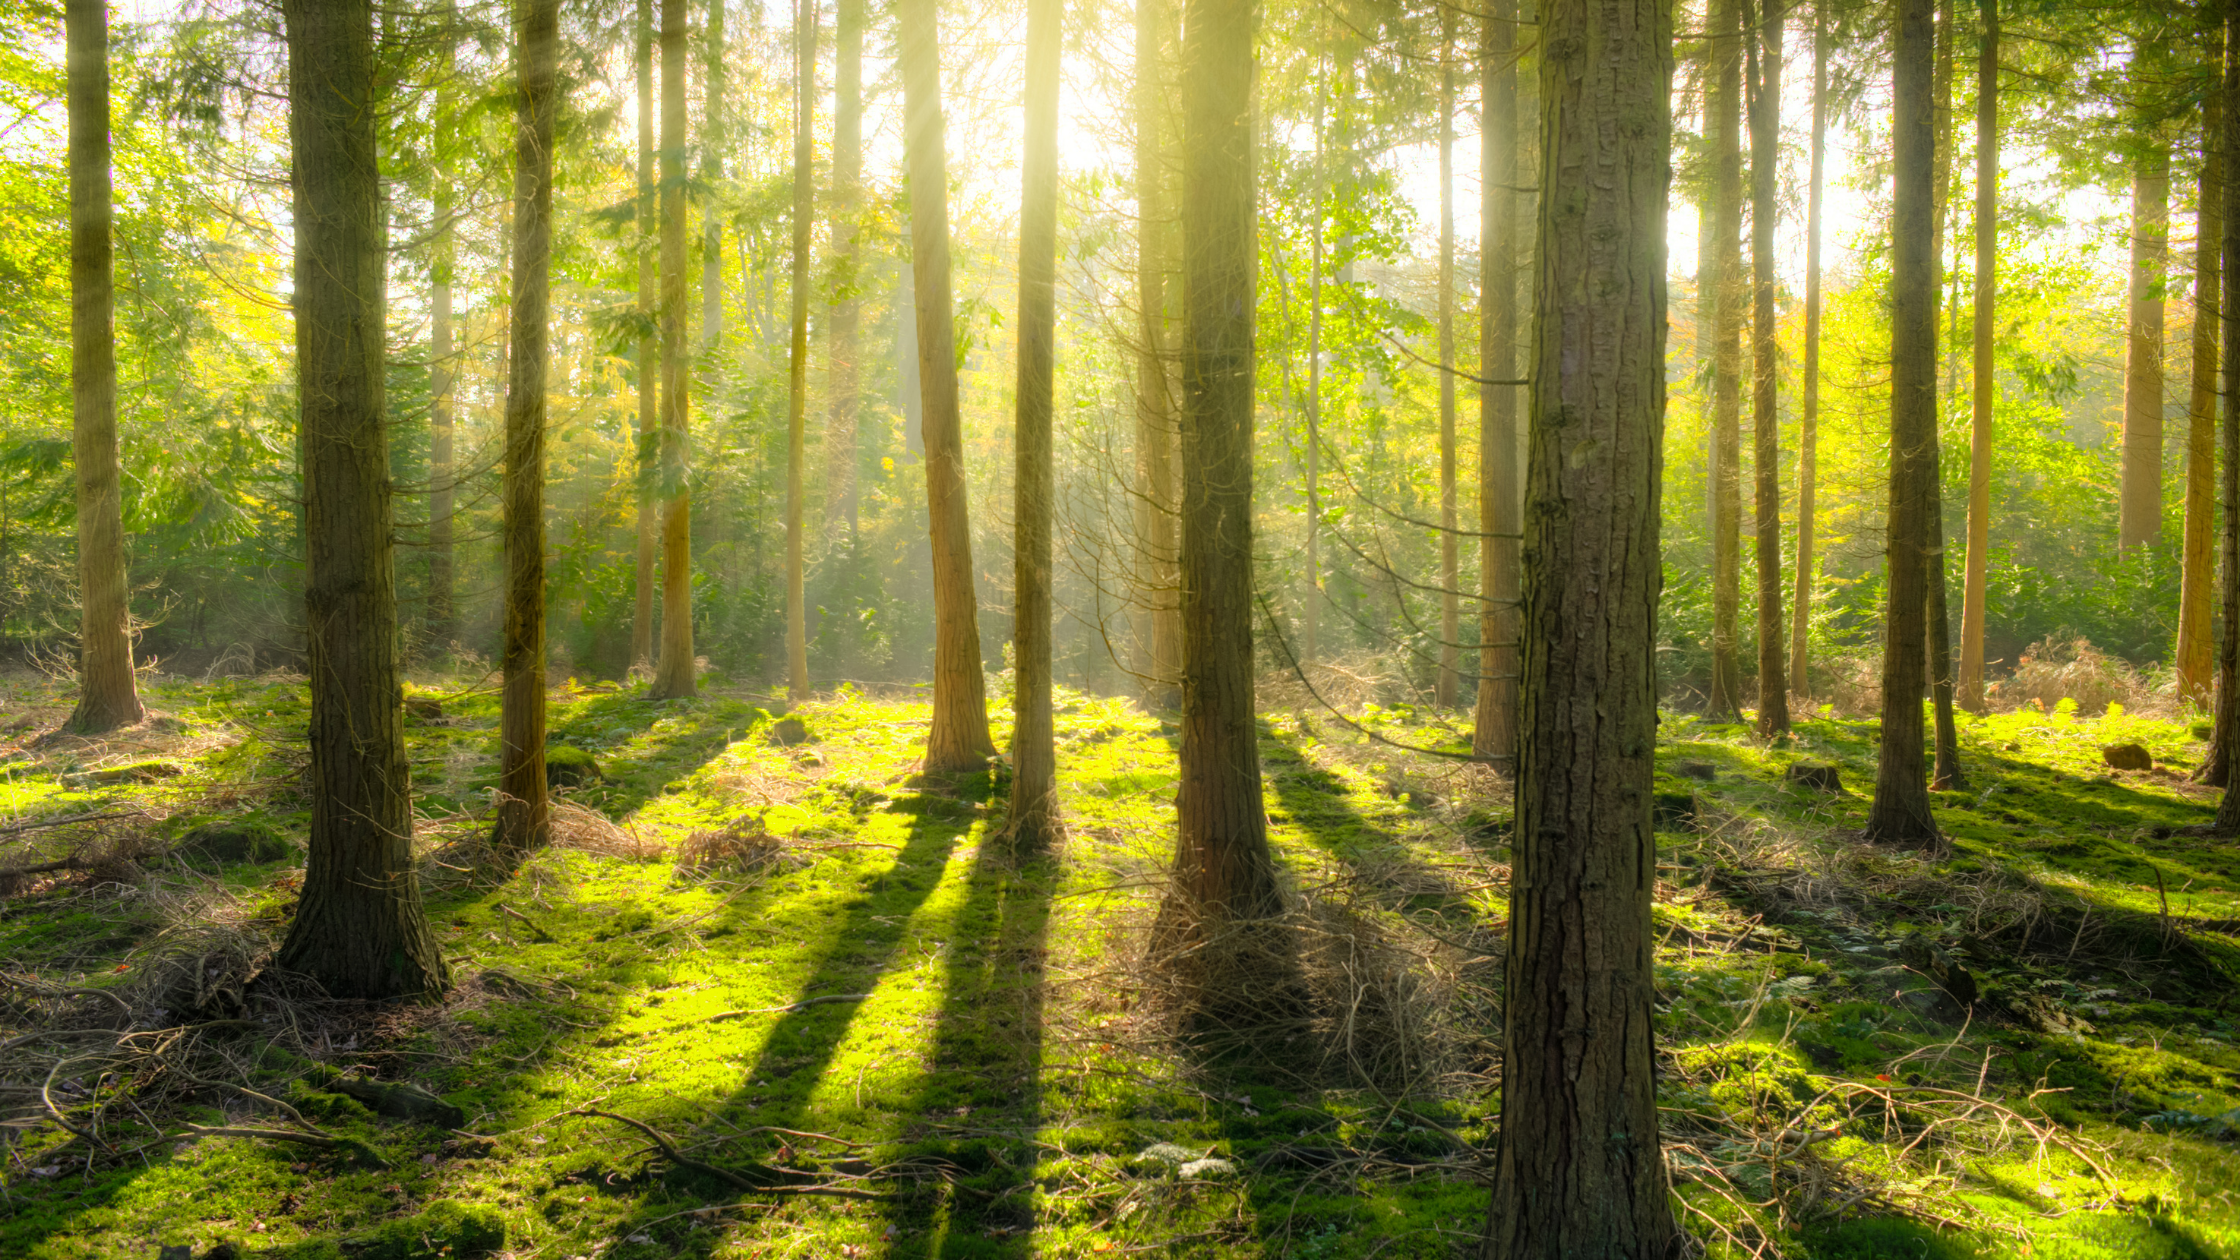 10 Benefits of Trees Everyone Should Know